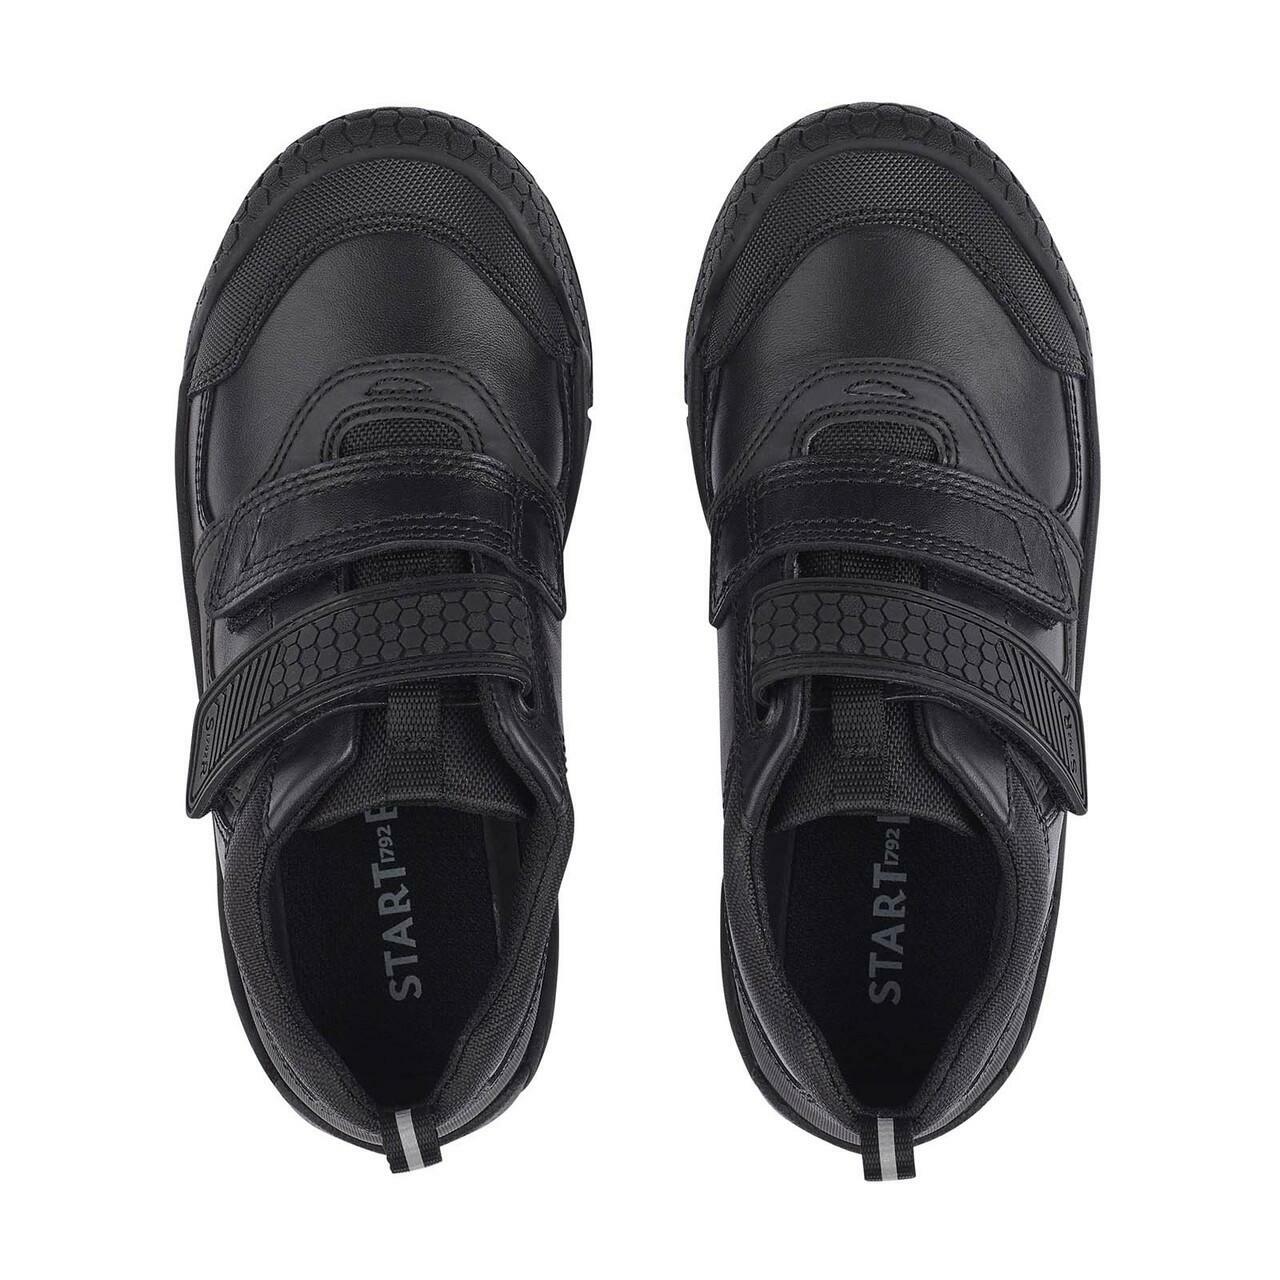 A pair of boys school shoes by Start Rite, style Strike, in black leather with double velcro fastening. Top view.